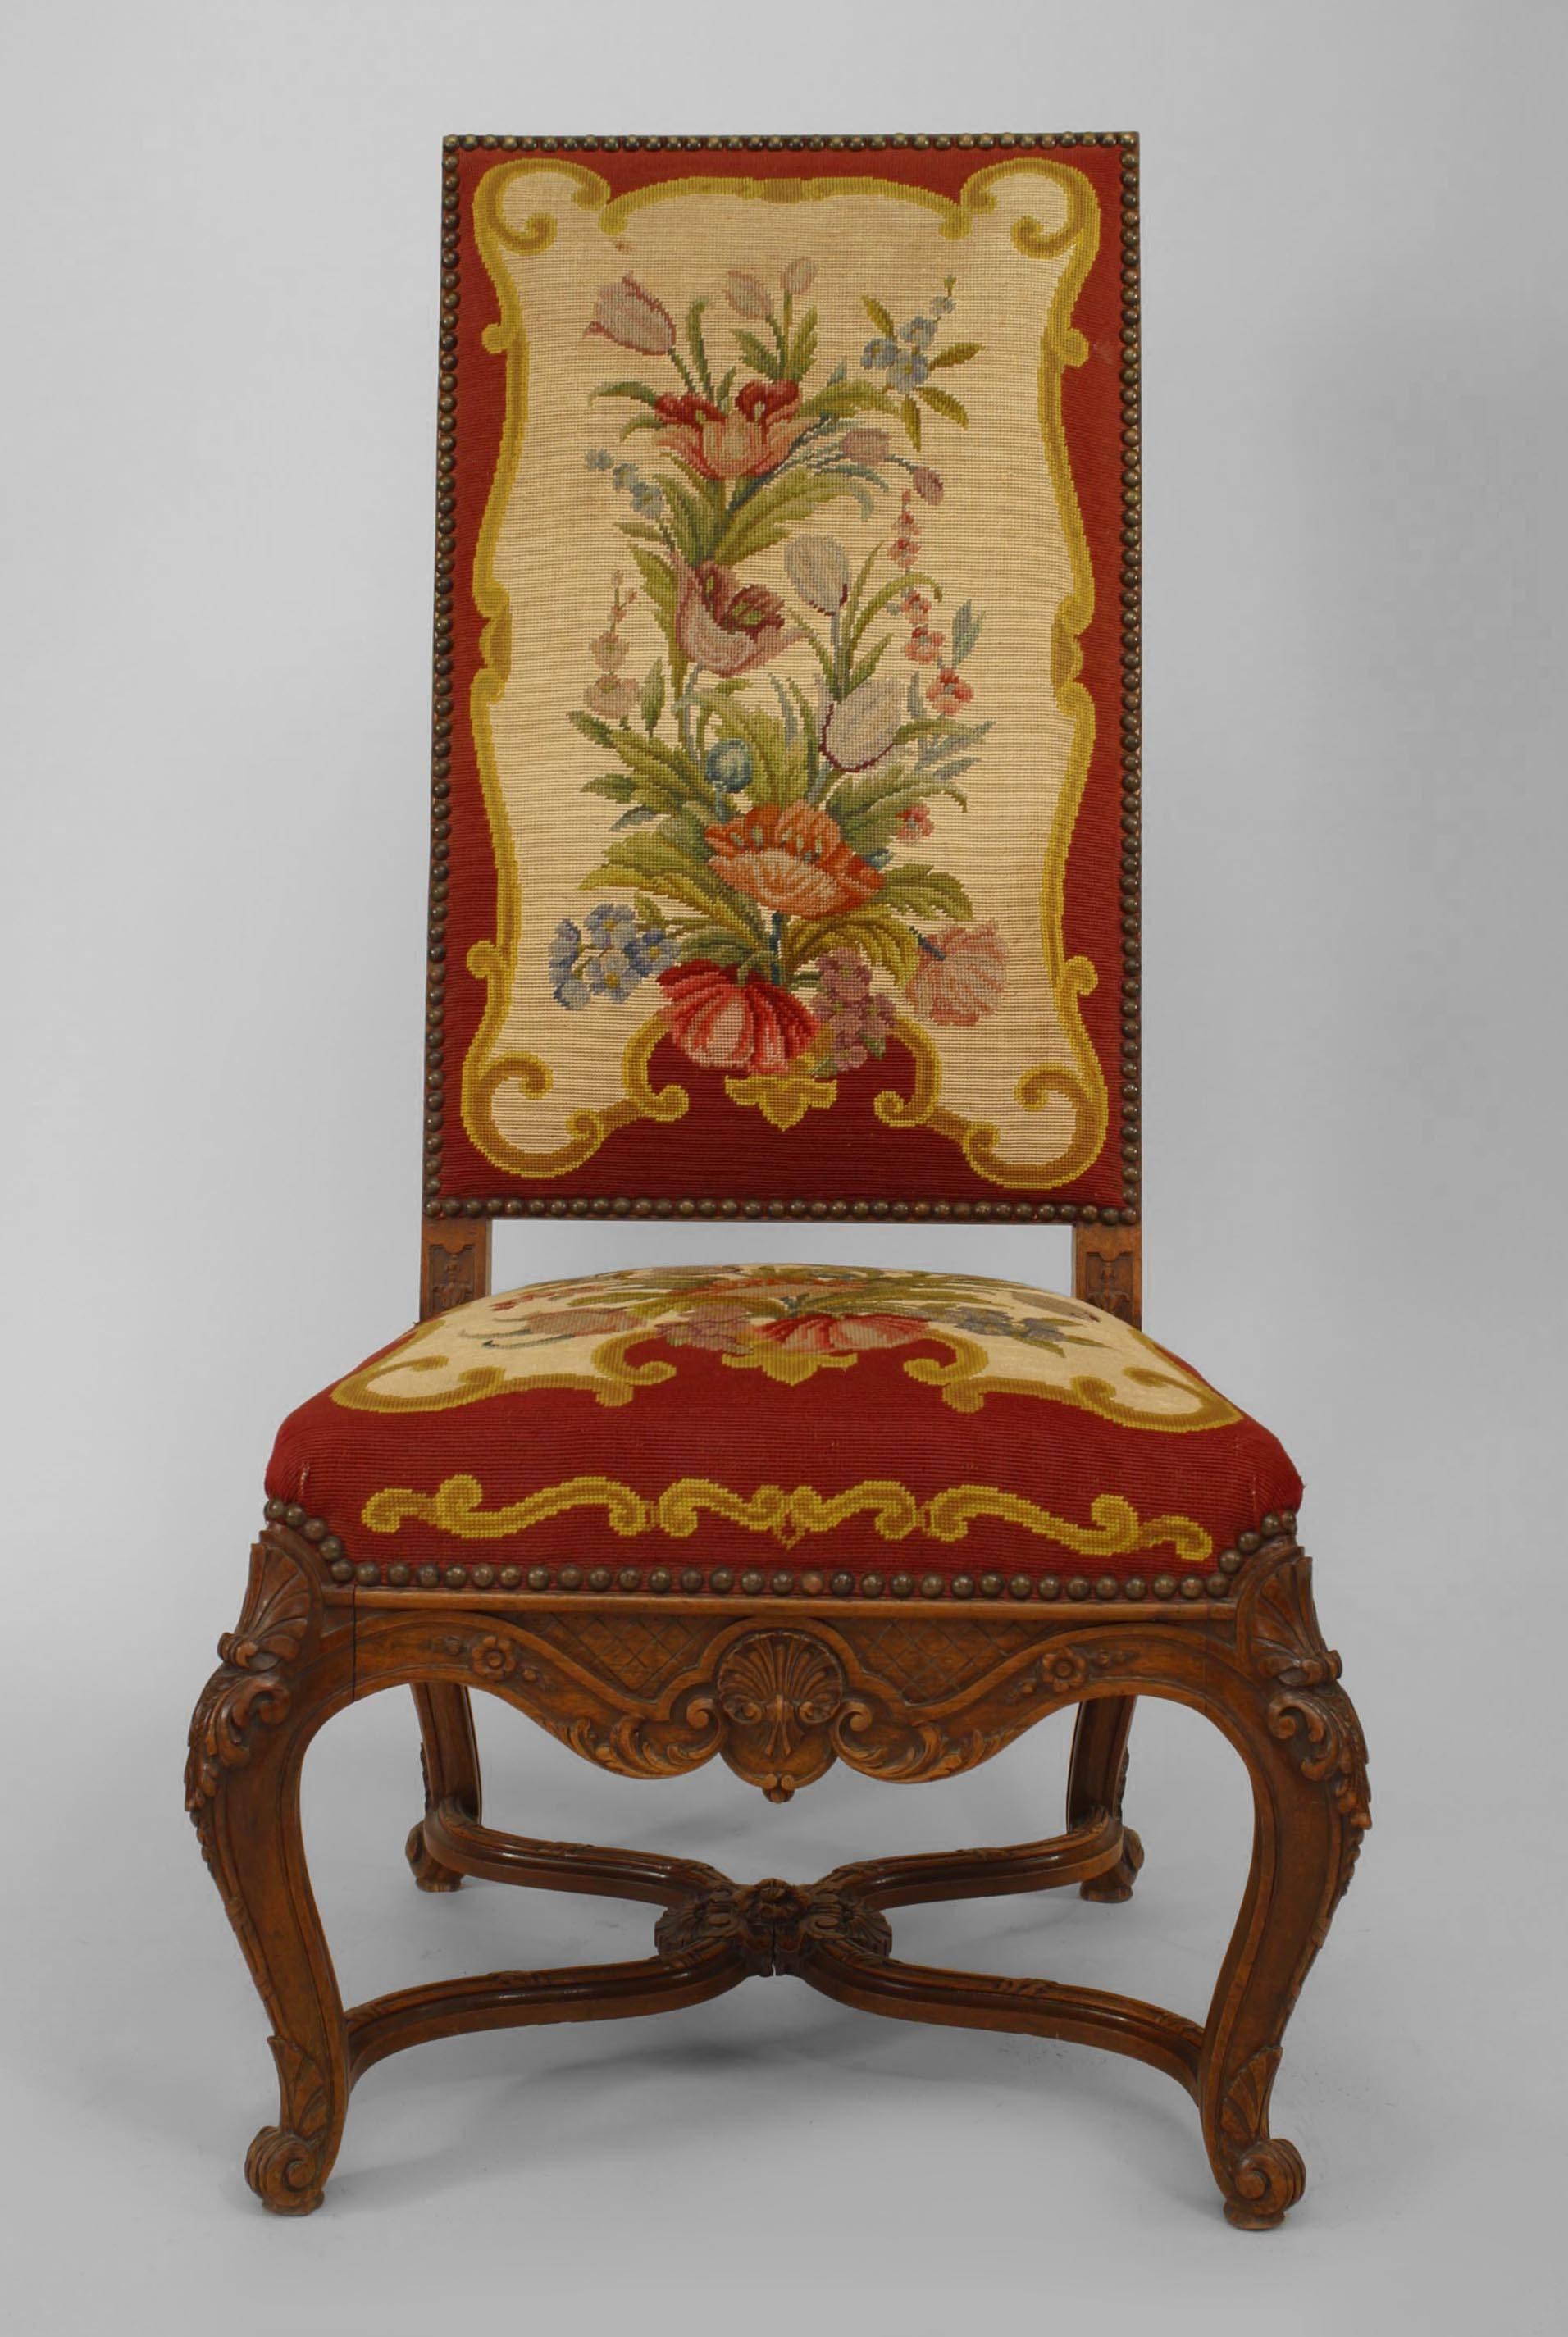 Set of 4 French Regence style (19th Cent) walnut high back side chairs with carved stretcher and upholstered red floral Aubusson seat and back.
